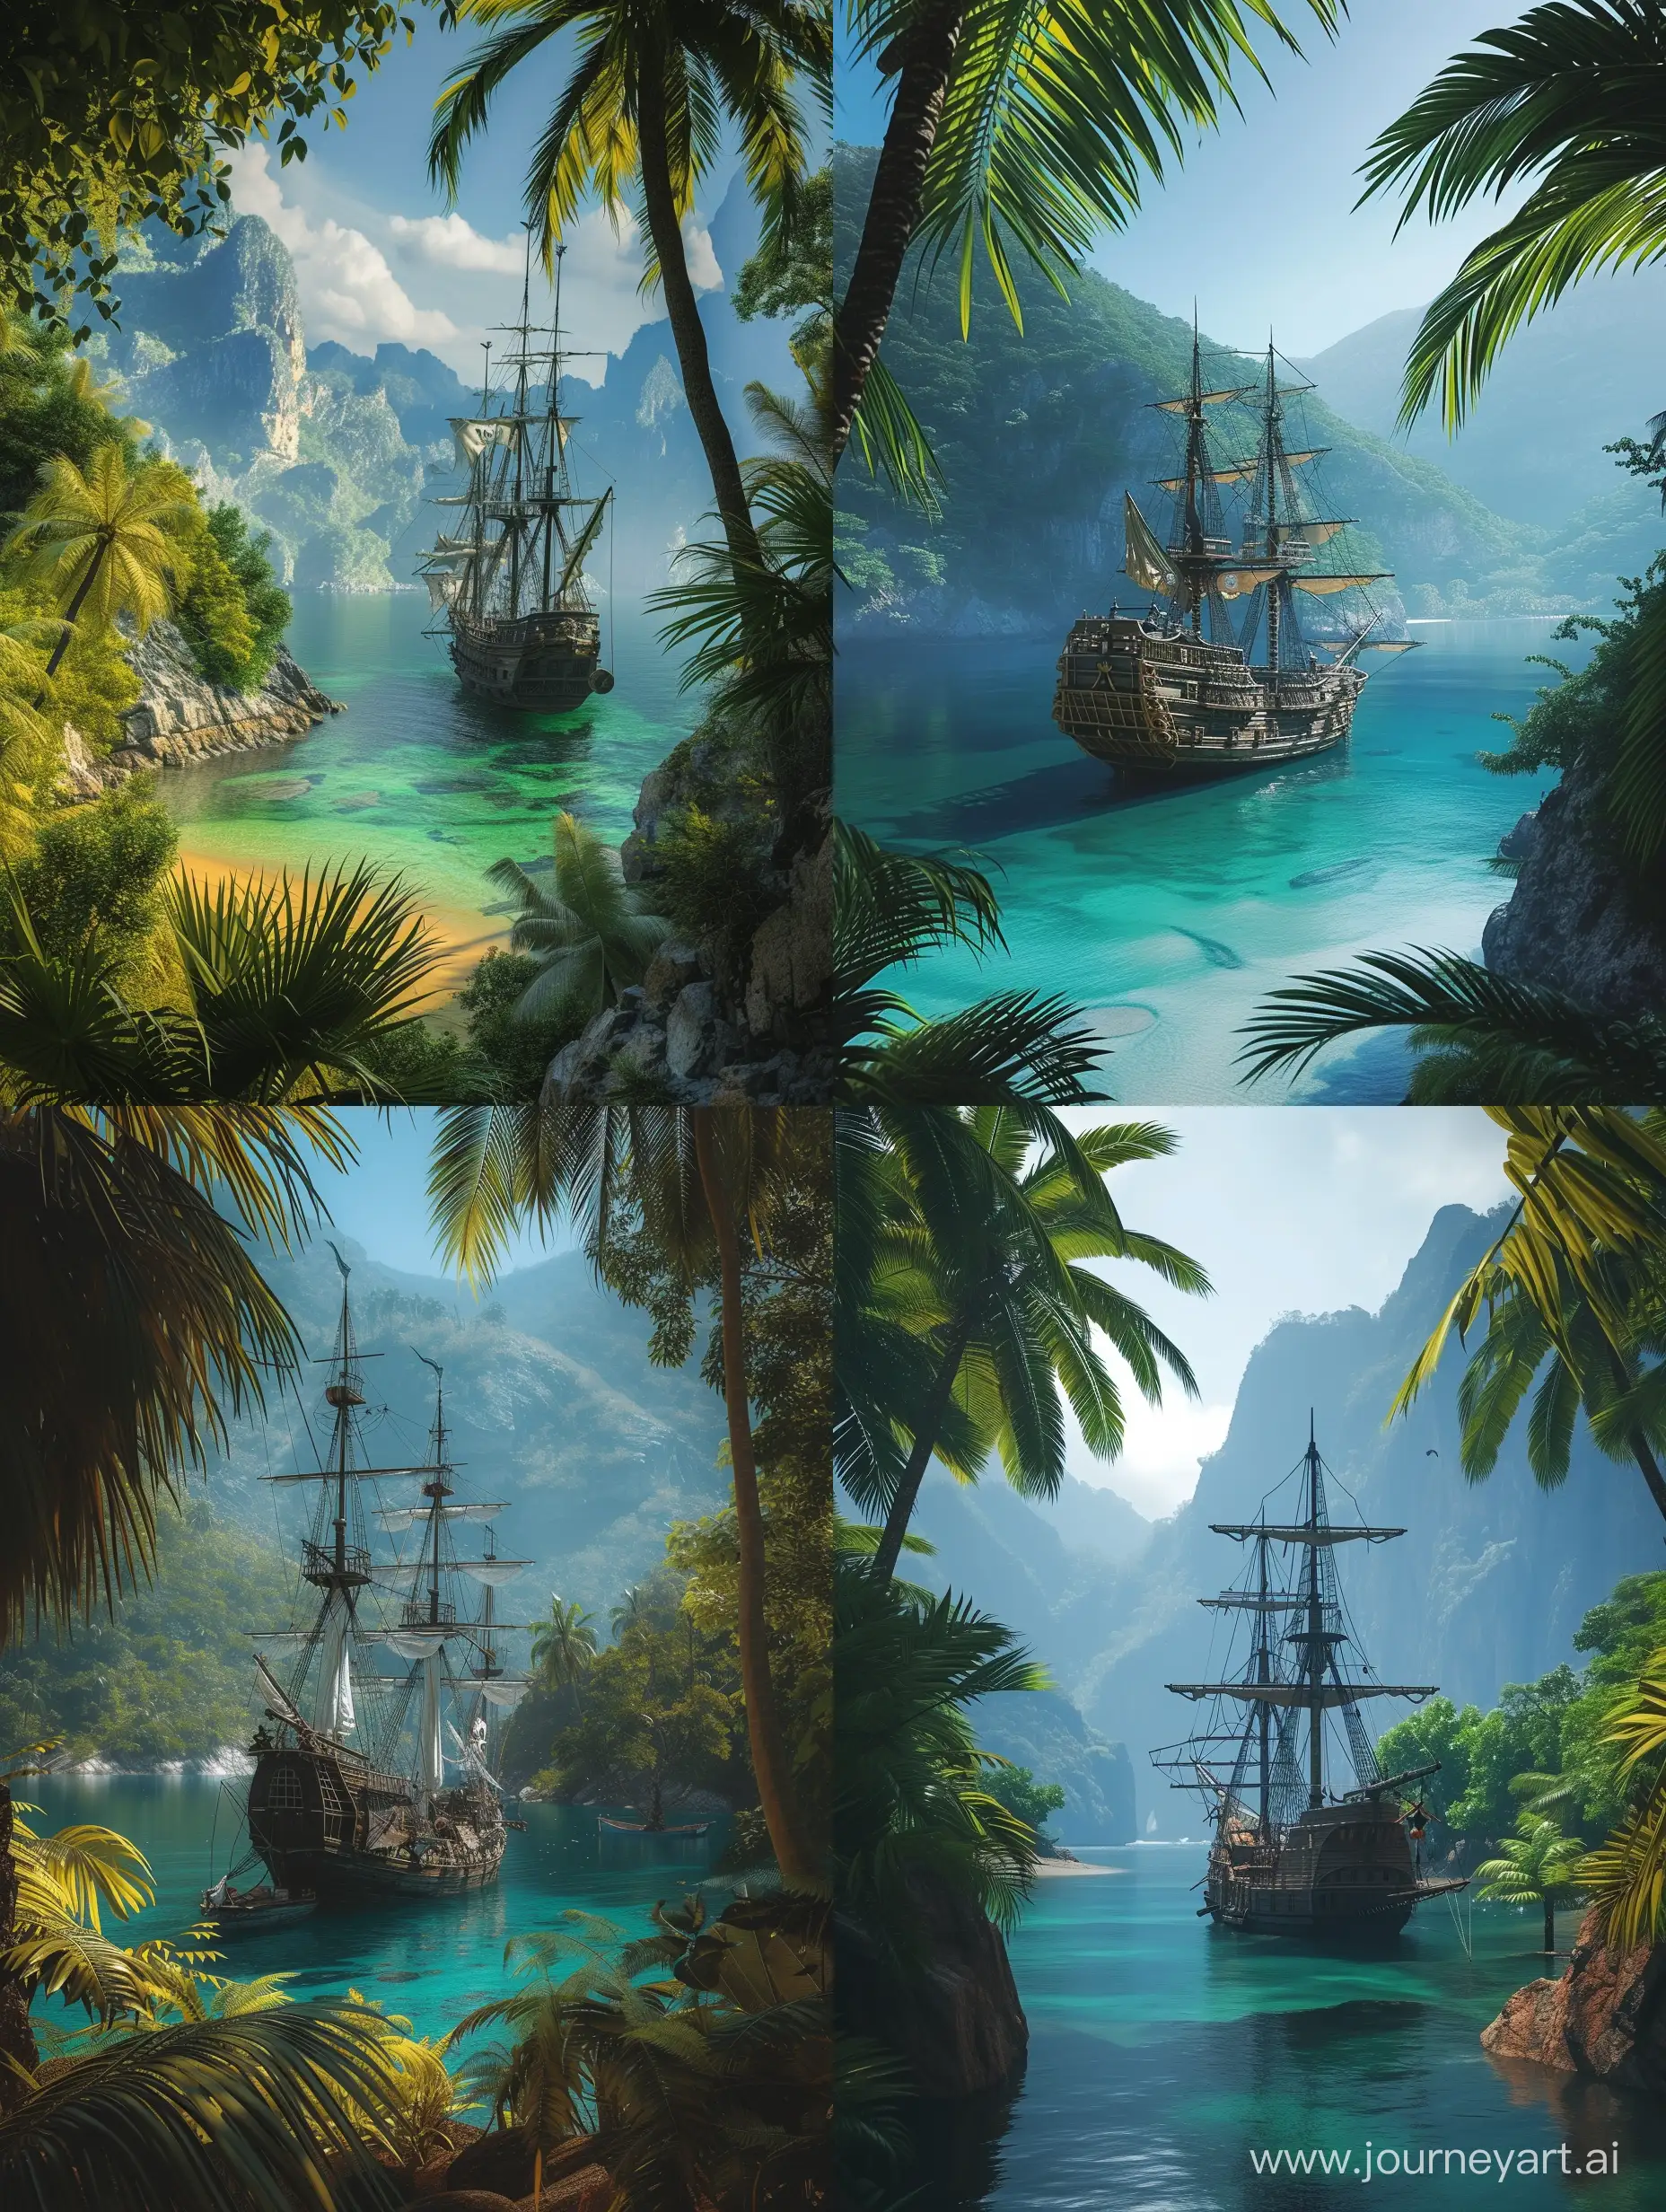 Pirate ship in a tropical bay, in the day light